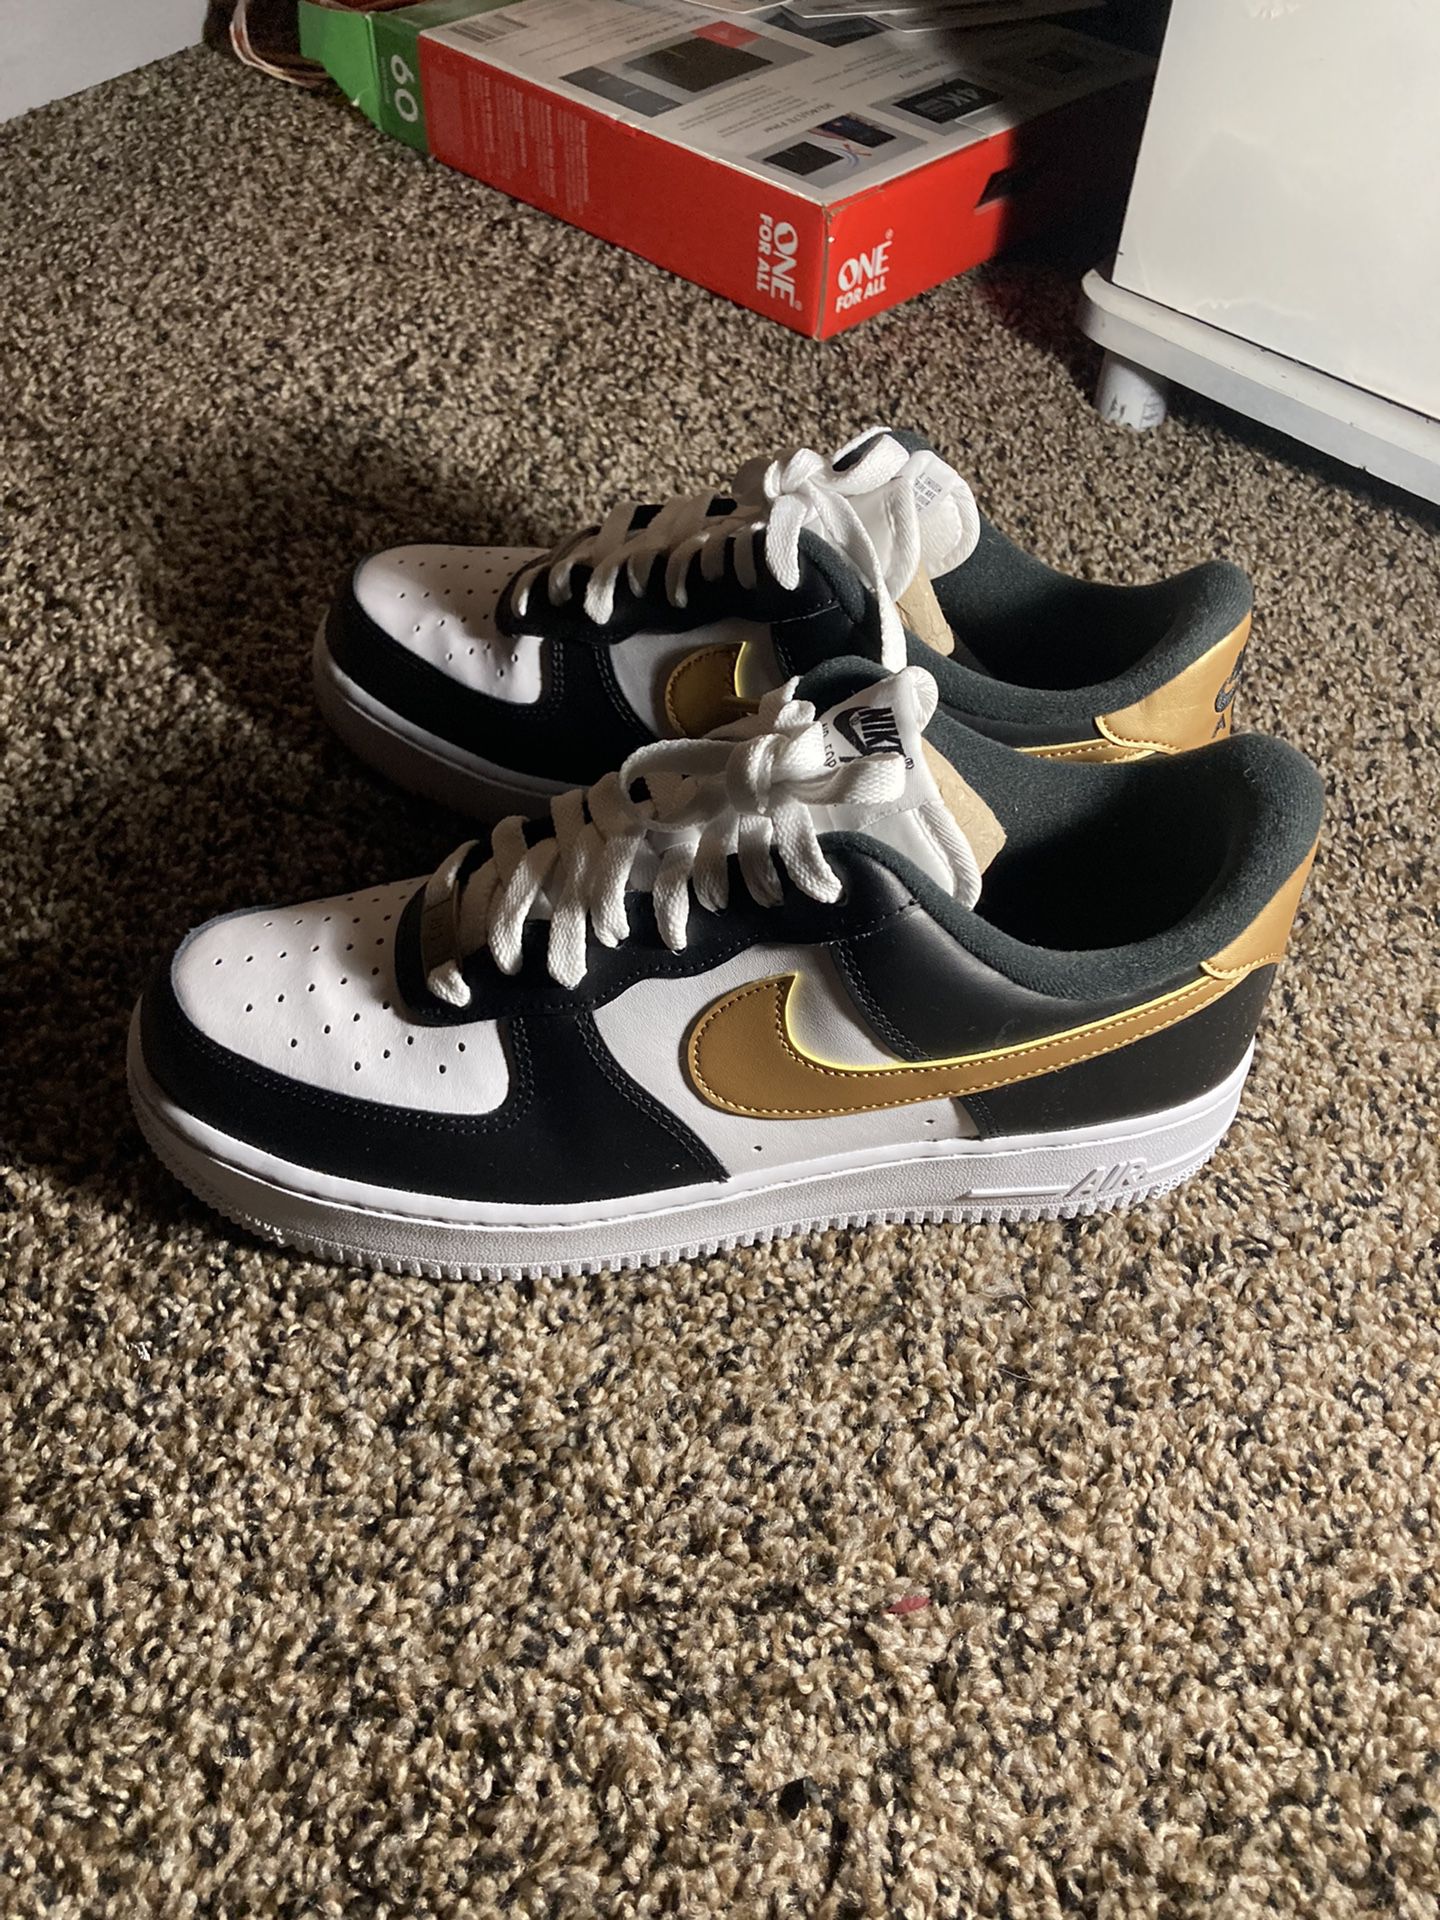 Nike Air Force 1 '07 Black Gold 2020 for Sale